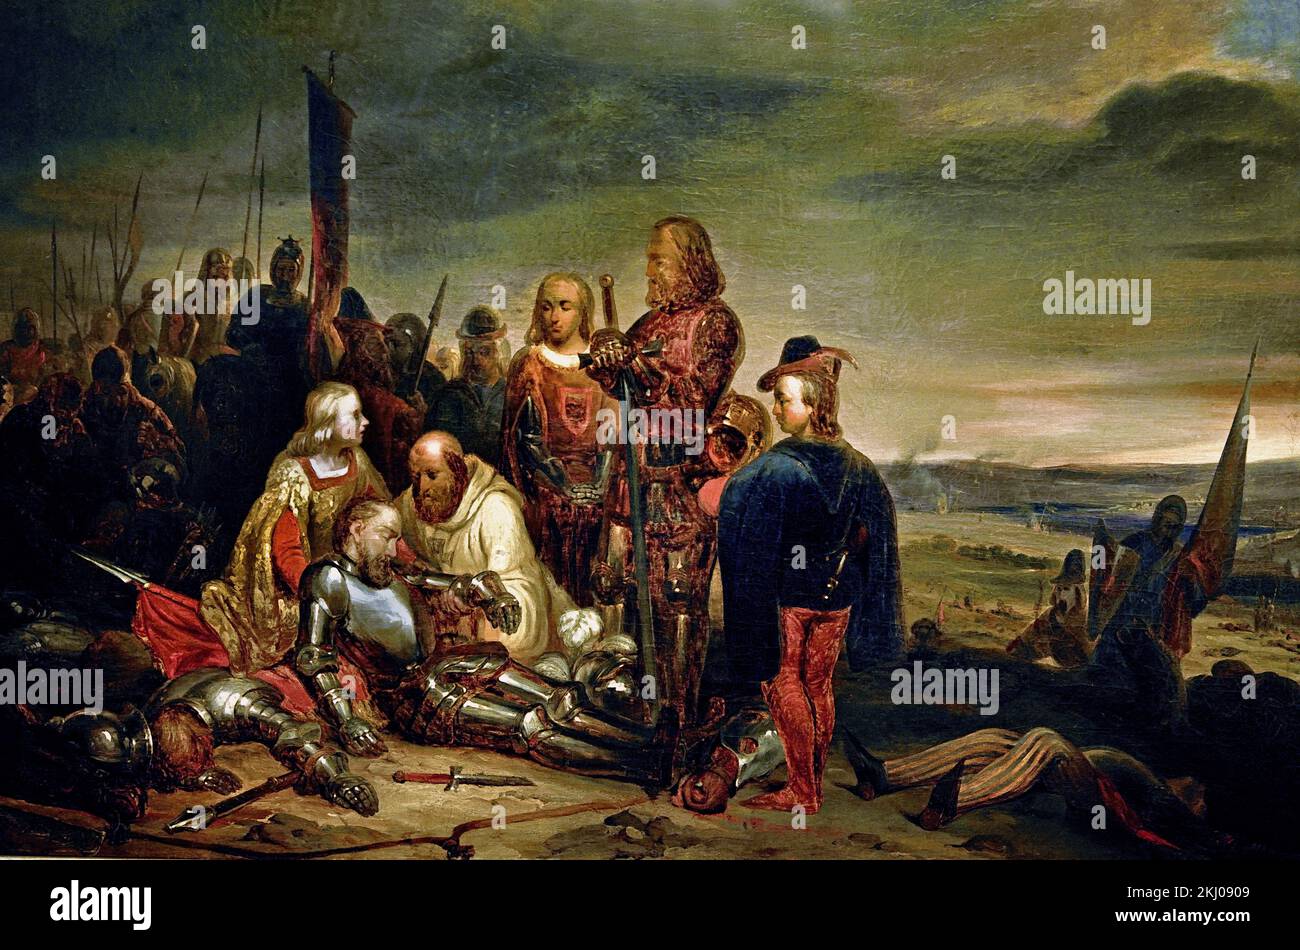 Death of John the Blind (Bohemian King killed at Battle of Crécy in 1346) painting by Nicolas Liez  Museum, Luxembourg, ( John the Blind or John of Luxembourg was the Count of Luxembourg from 1313 and King of Bohemia from 1310 and titular King of Poland. ) Stock Photo